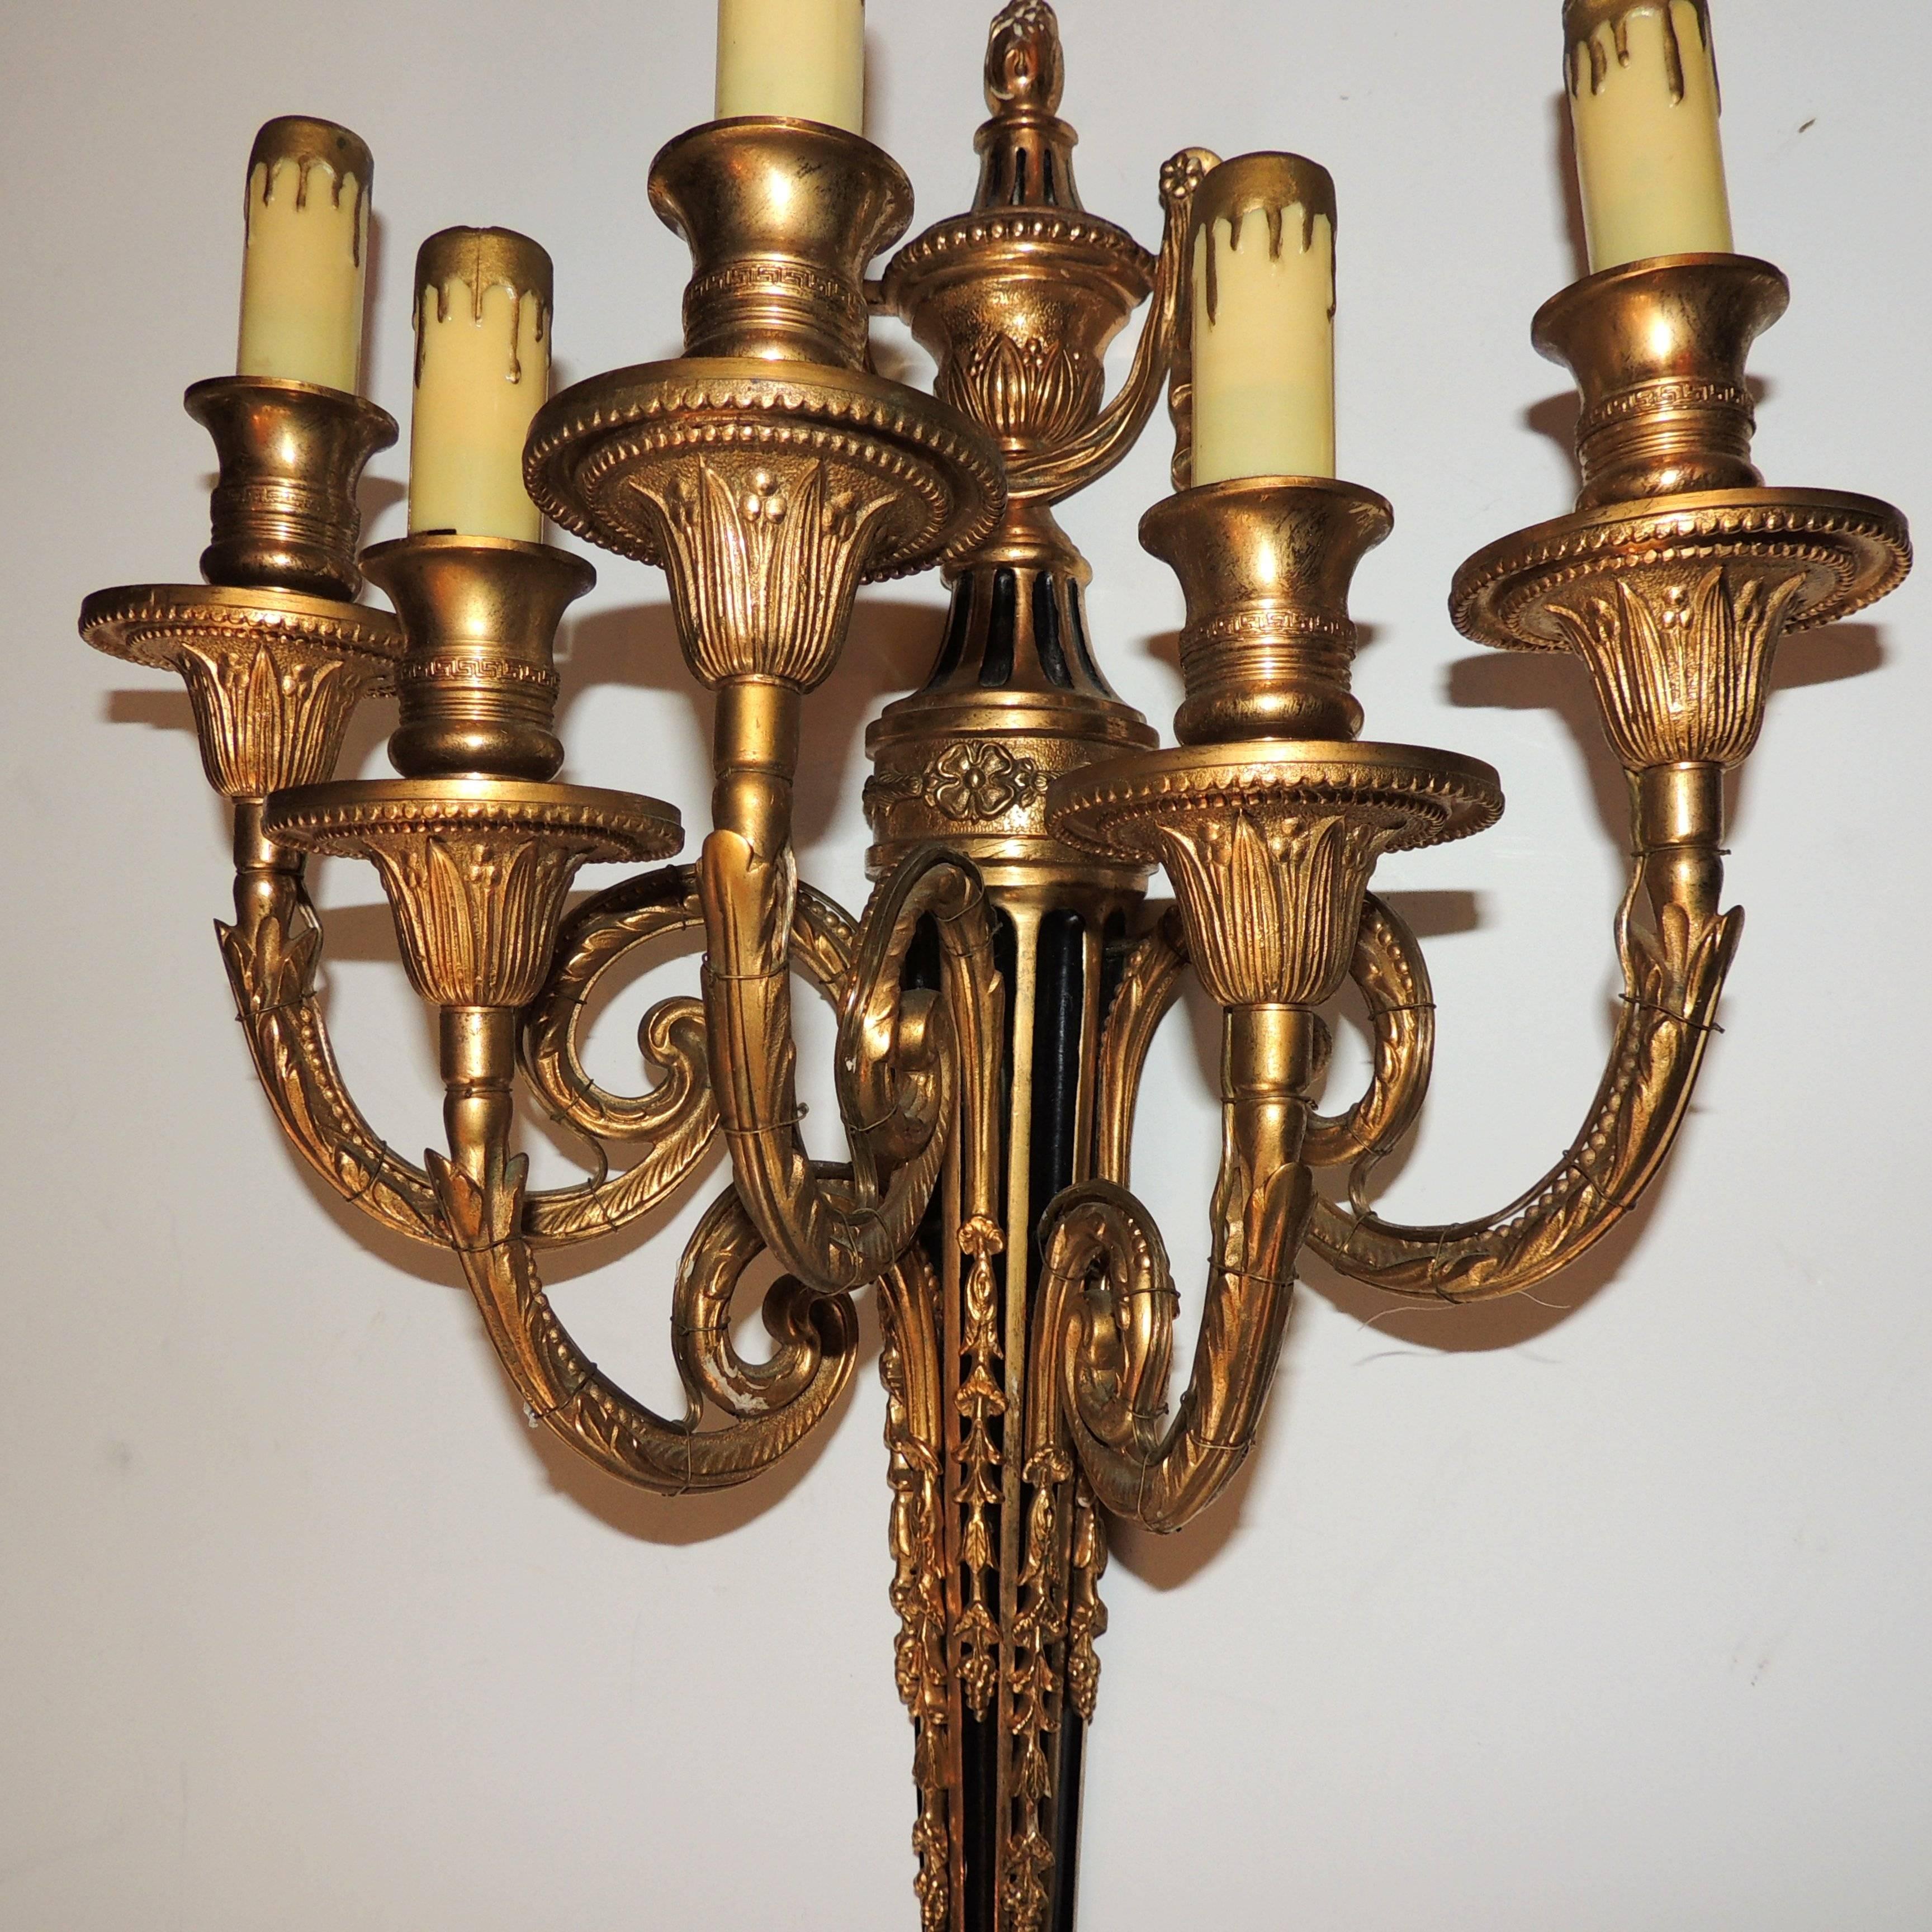 Wonderful Neoclassical Dore Bronze Patinated Five-Arm Urn Top Regency Sconce In Good Condition For Sale In Roslyn, NY